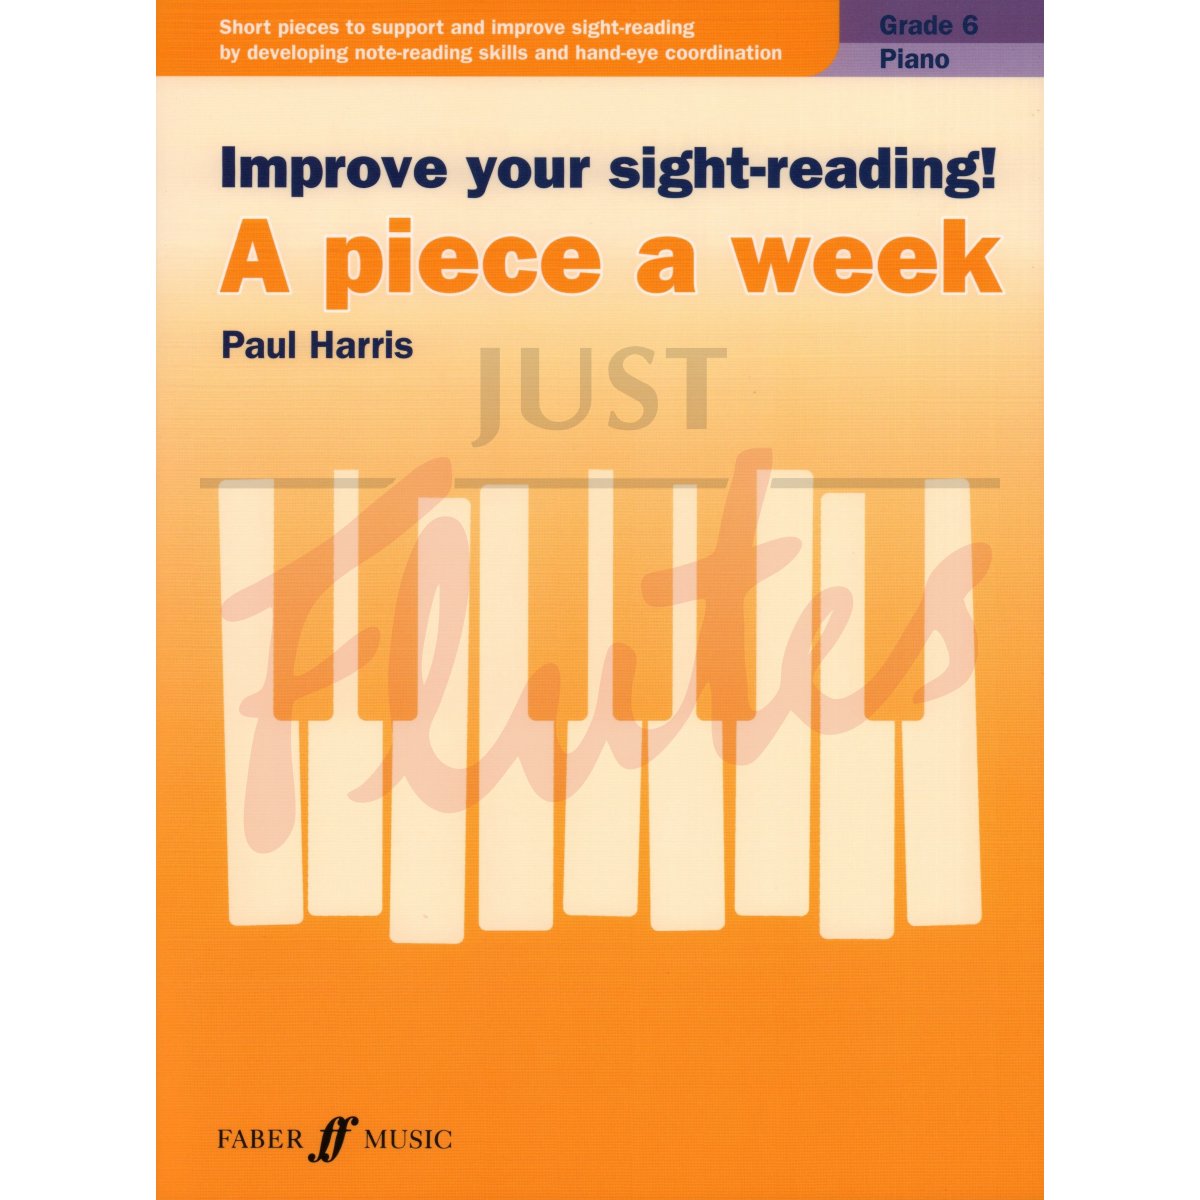 Improve your Sight-Reading! A Piece a Week Piano Grade 6